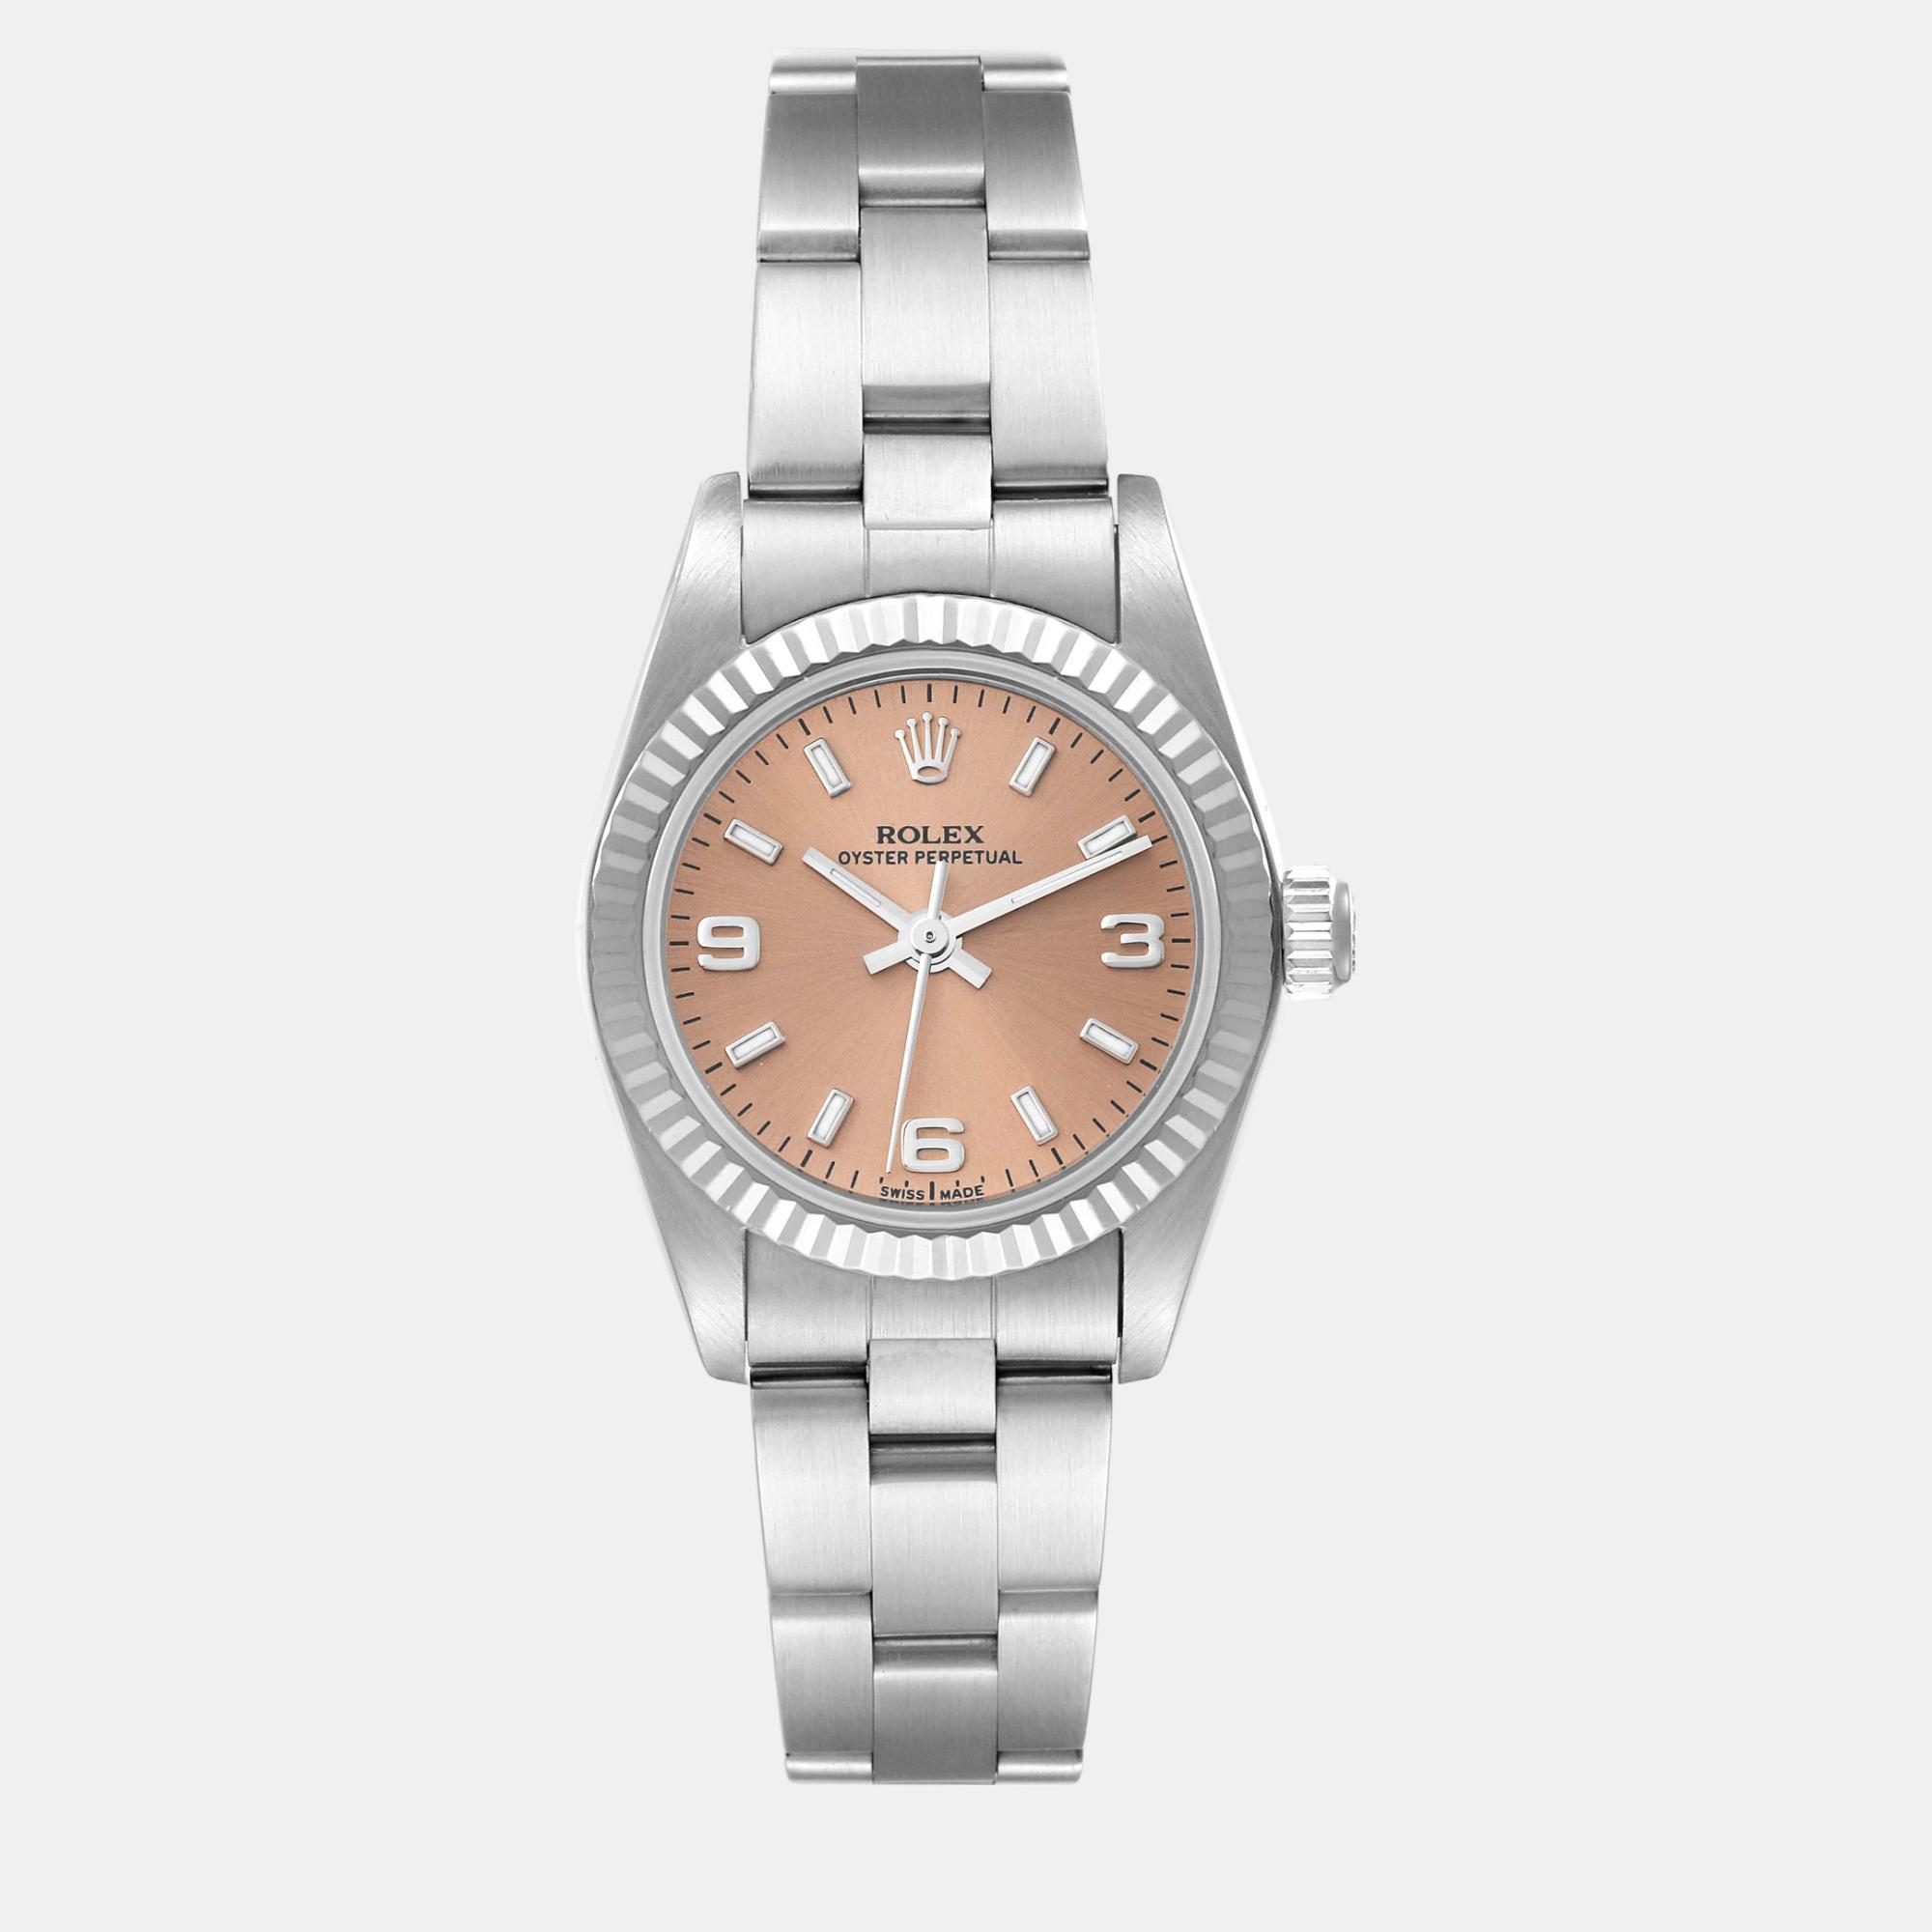 Rolex oyster perpetual salmon dial steel white gold ladies watch 24.0 mm